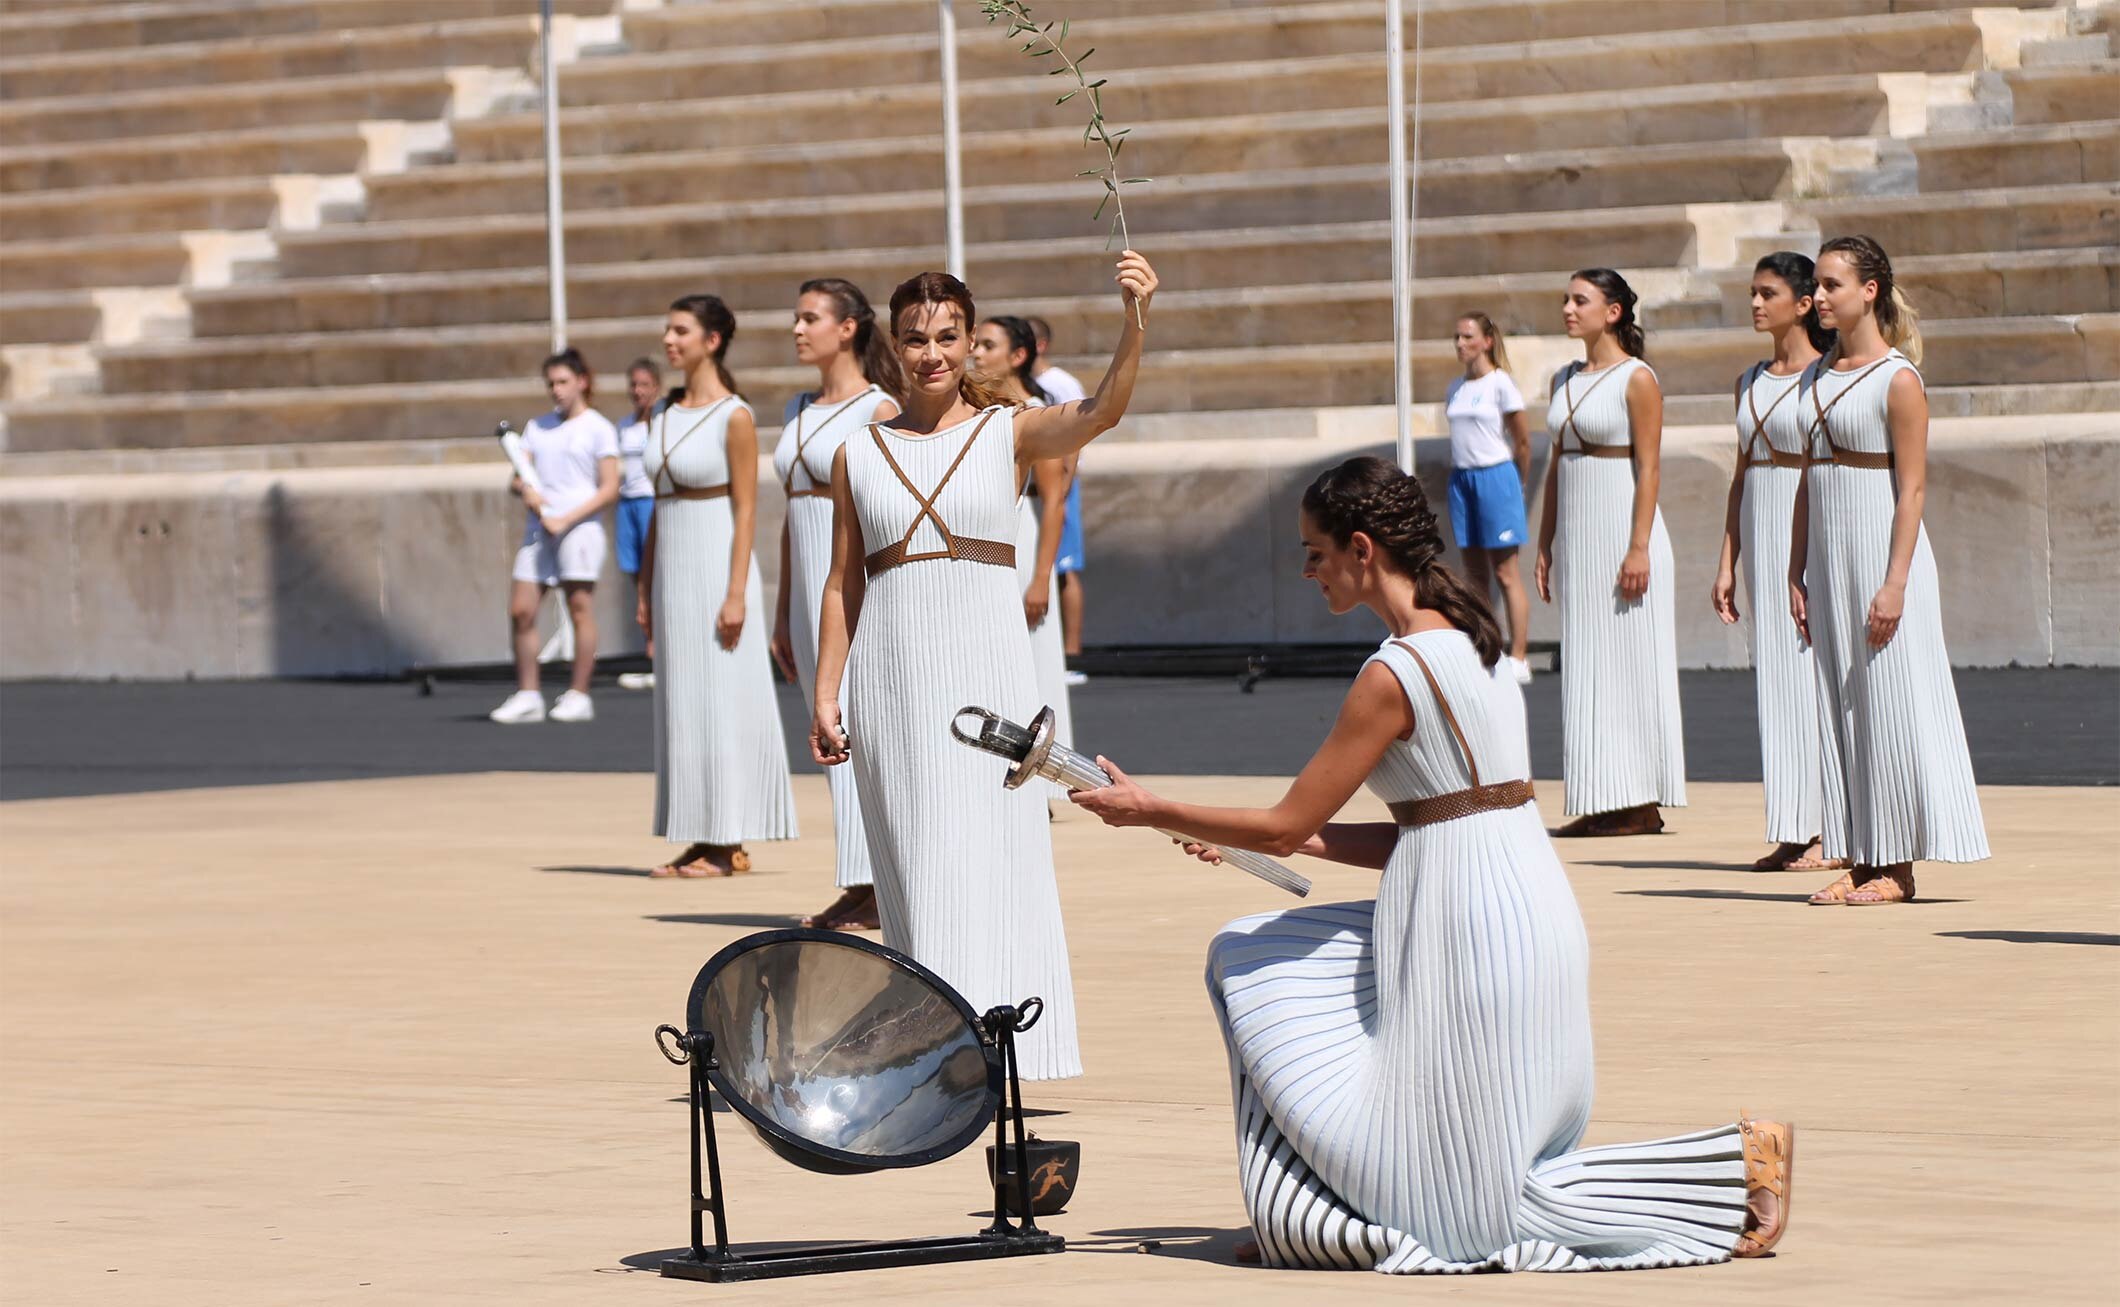 Lausanne 2020 Youth Olympic Flame lit in Athens